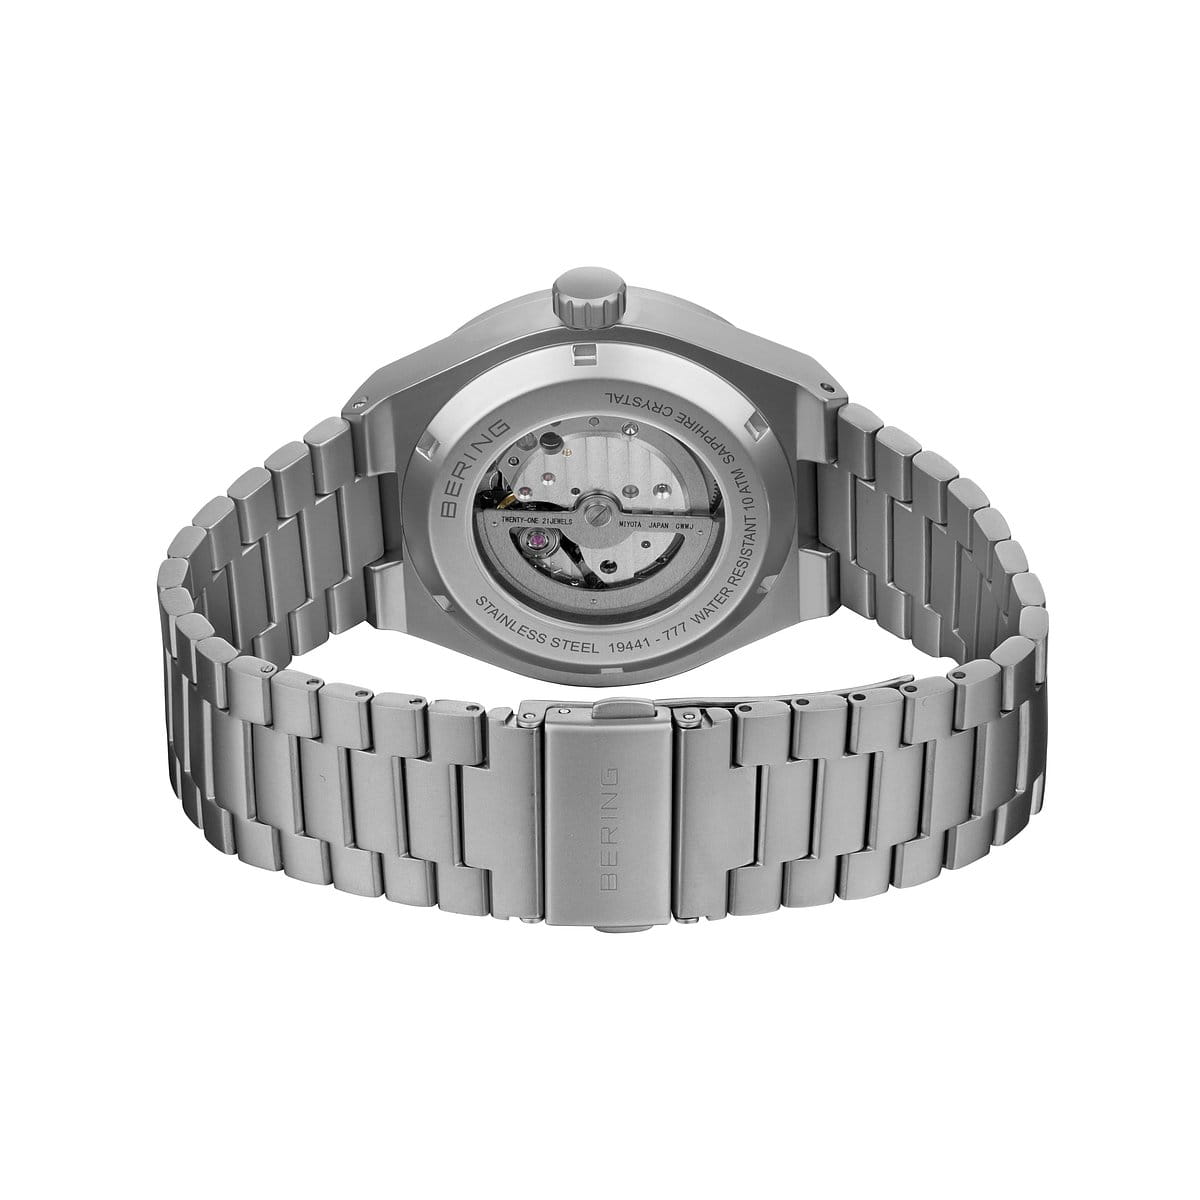 Bering Automatic Brushed Grey Watch